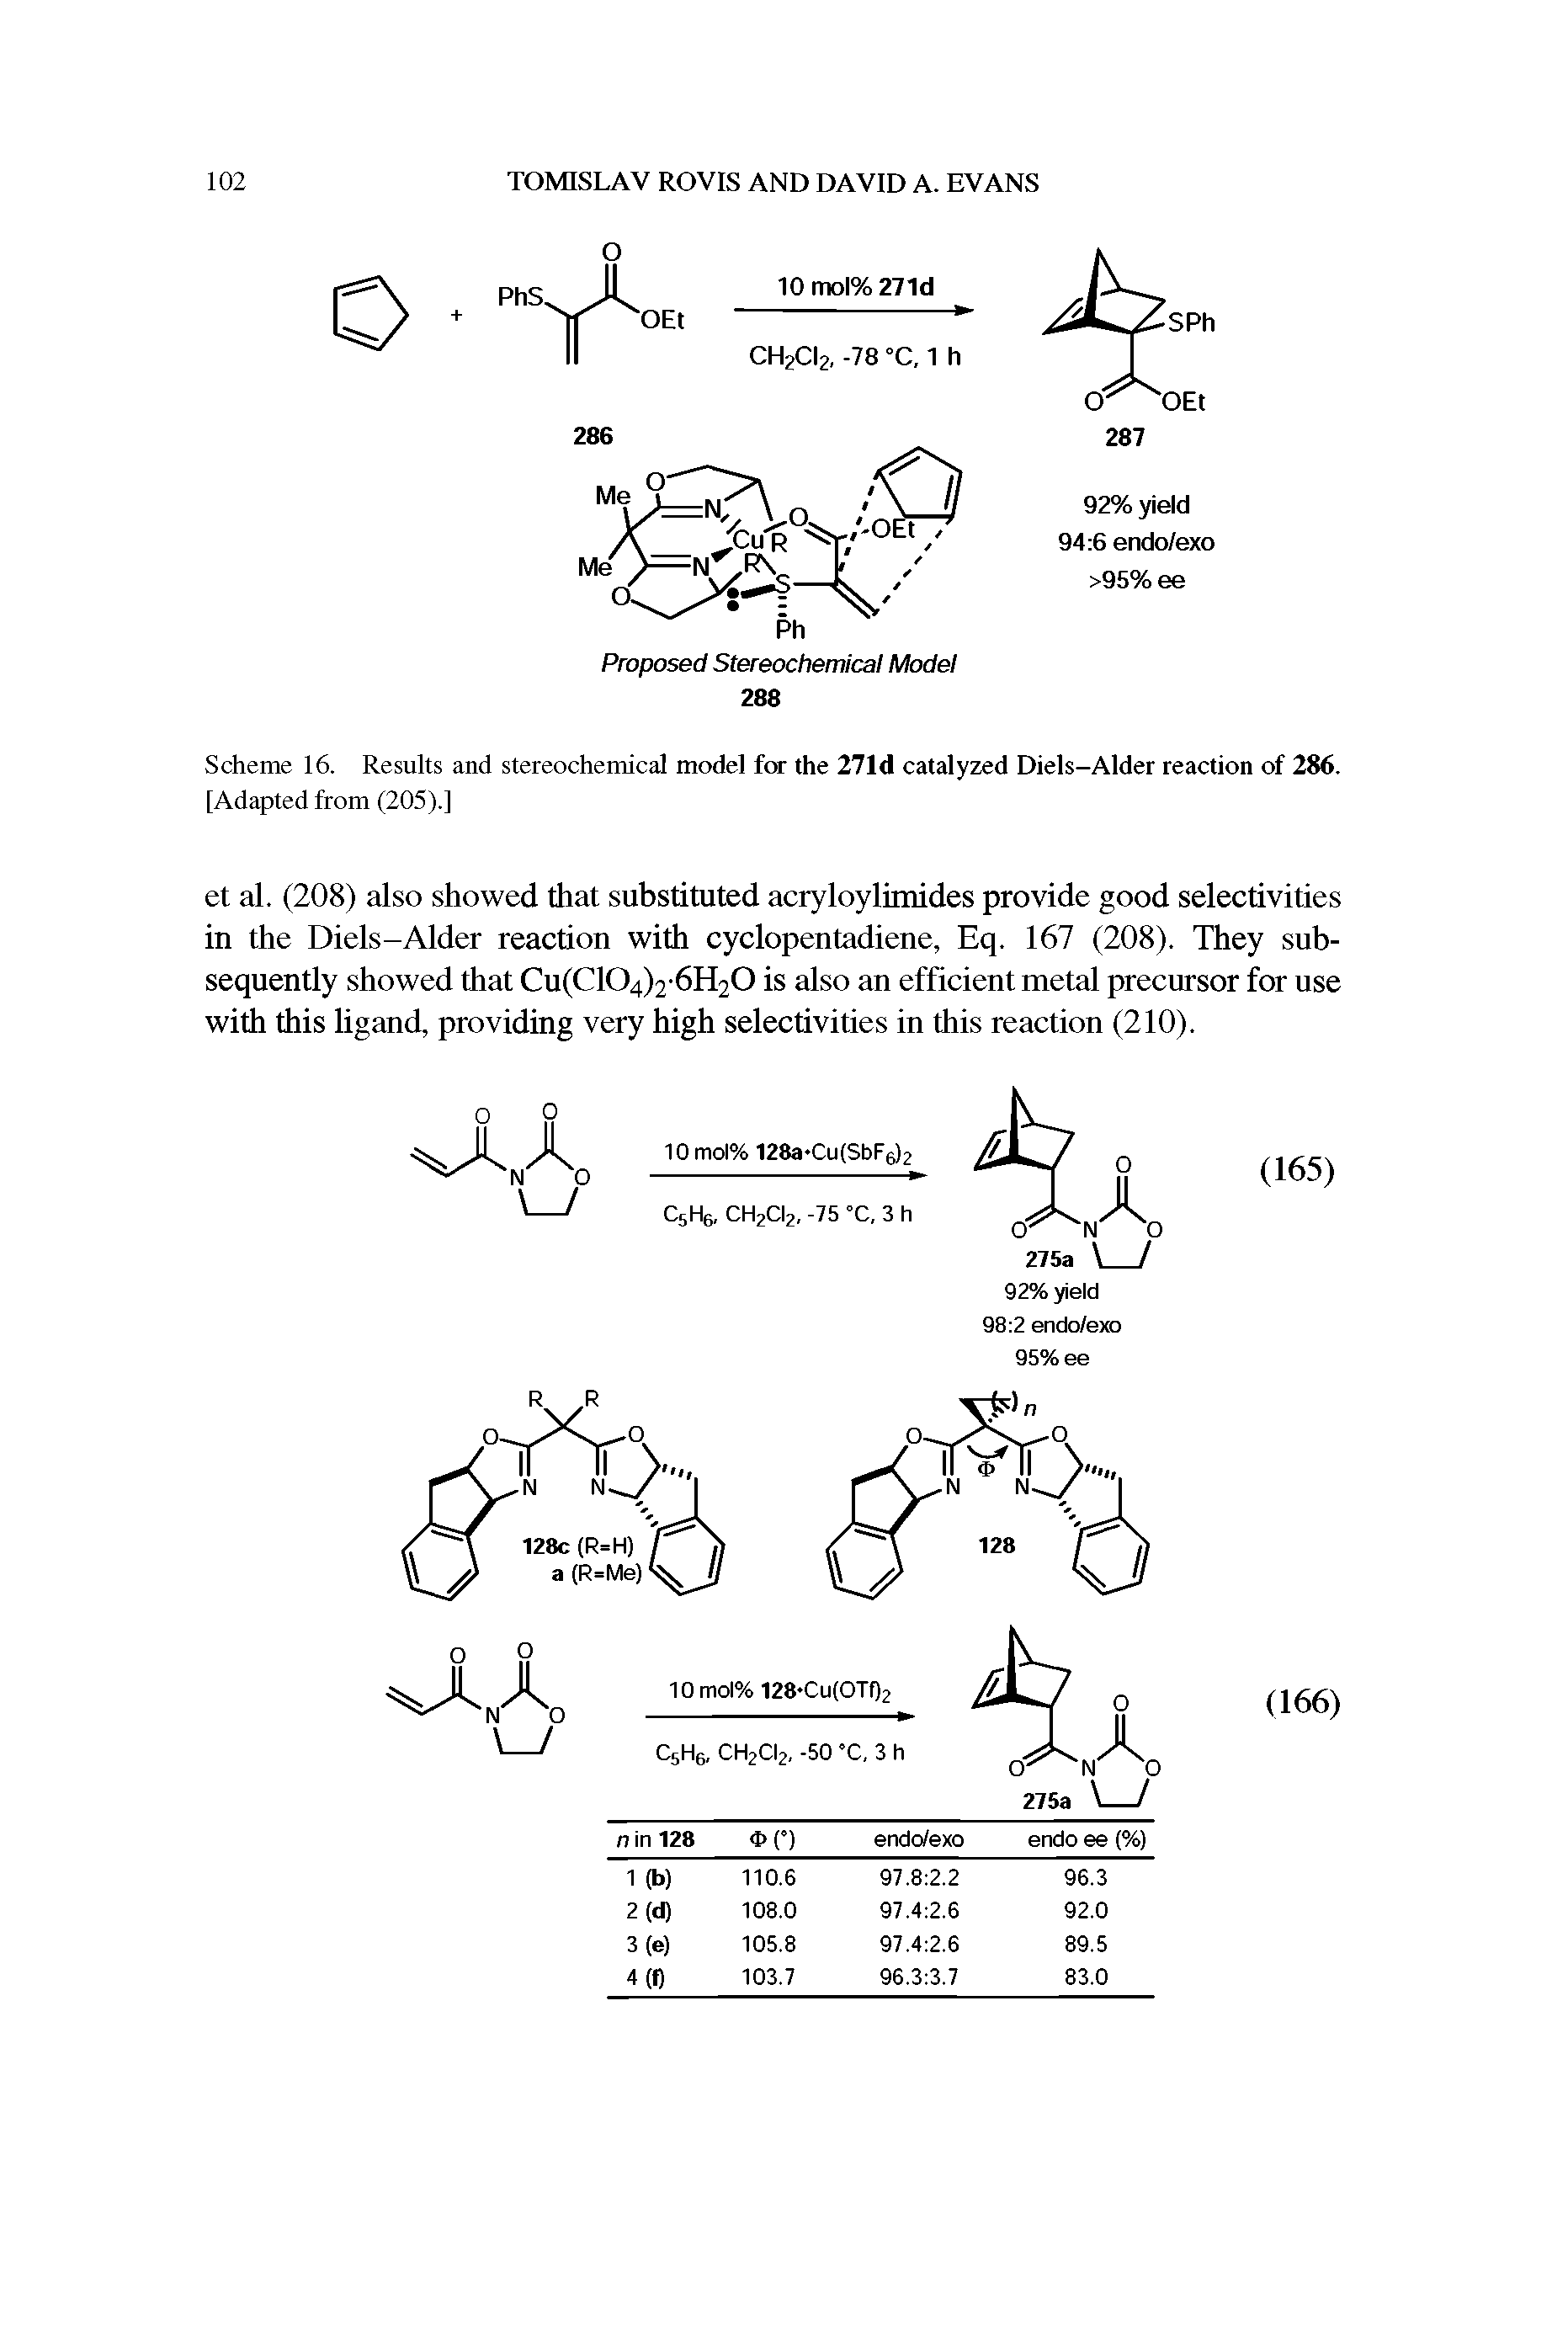 Scheme 16. Results and stereochemical model for the 271d catalyzed Diels—Alder reaction of 286. [Adapted from (205).]...